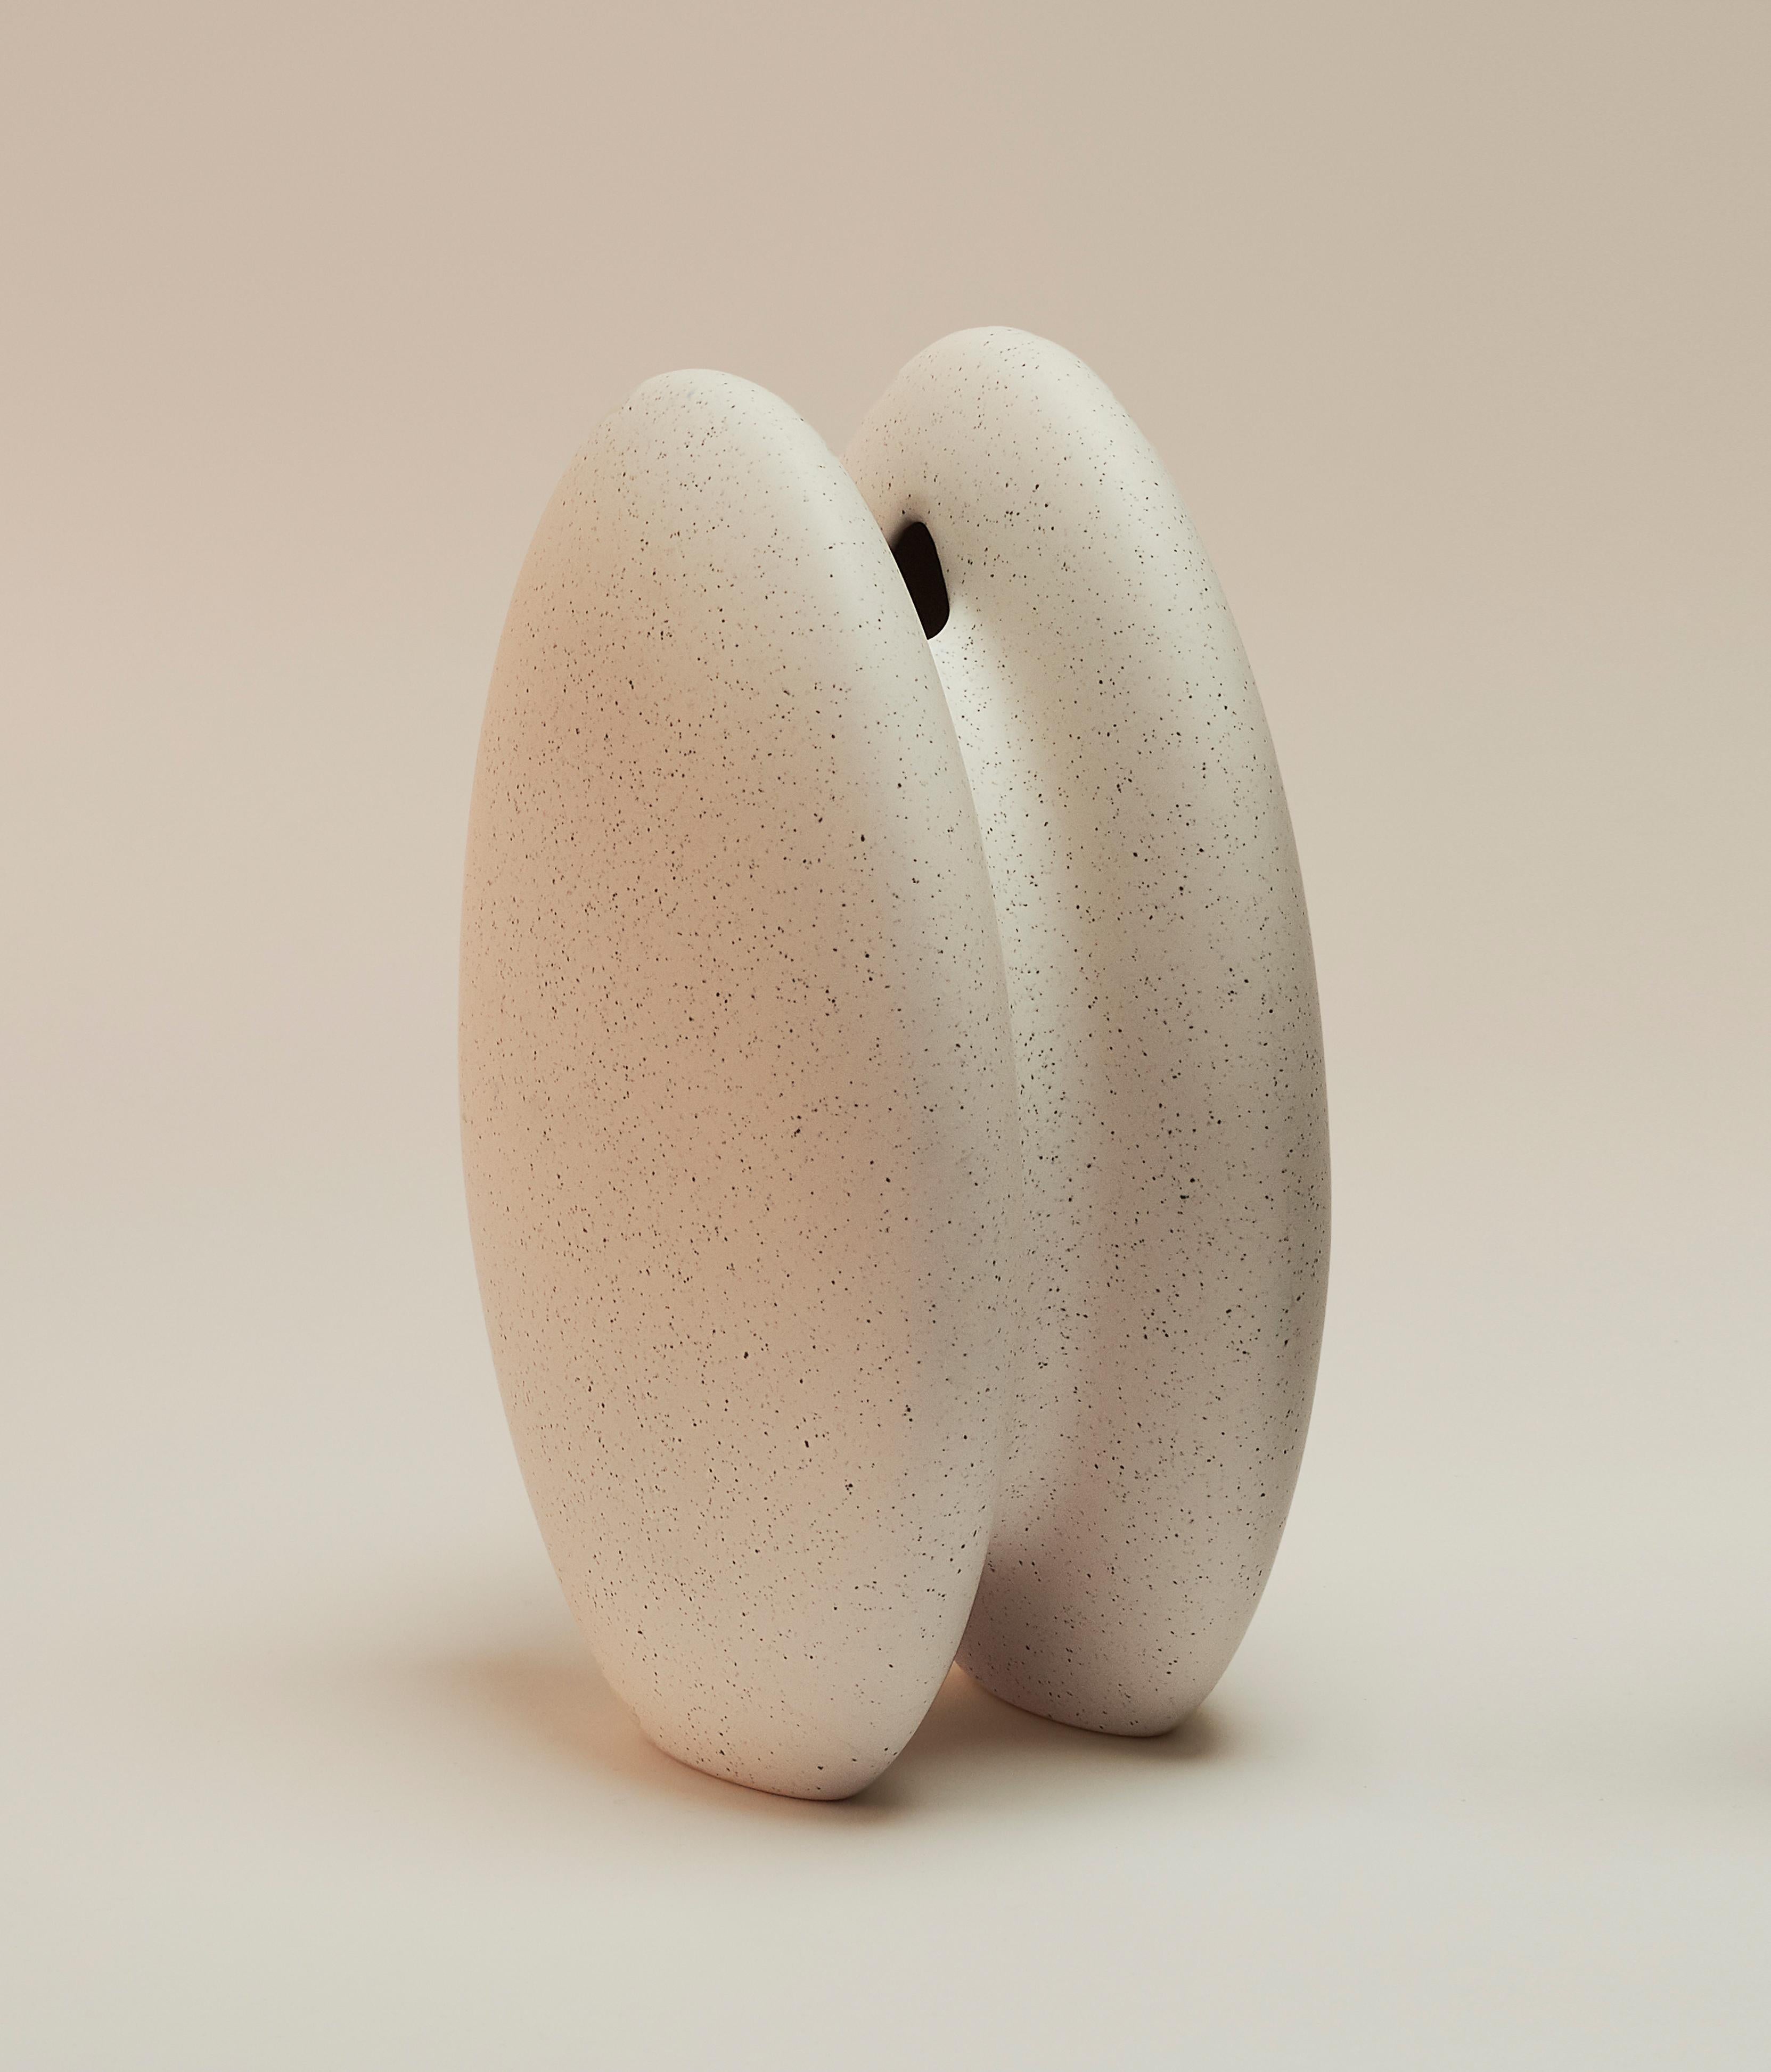 Simiente vase by Lilia Cruz Corona Garduño
Dimensions: W 11 x D 17 x H 25 cm
Materials: High-temperature ceramics (Stoneware) and vitrified glaze

Platalea studio was born out of a passion for both art and design. We love how both are so